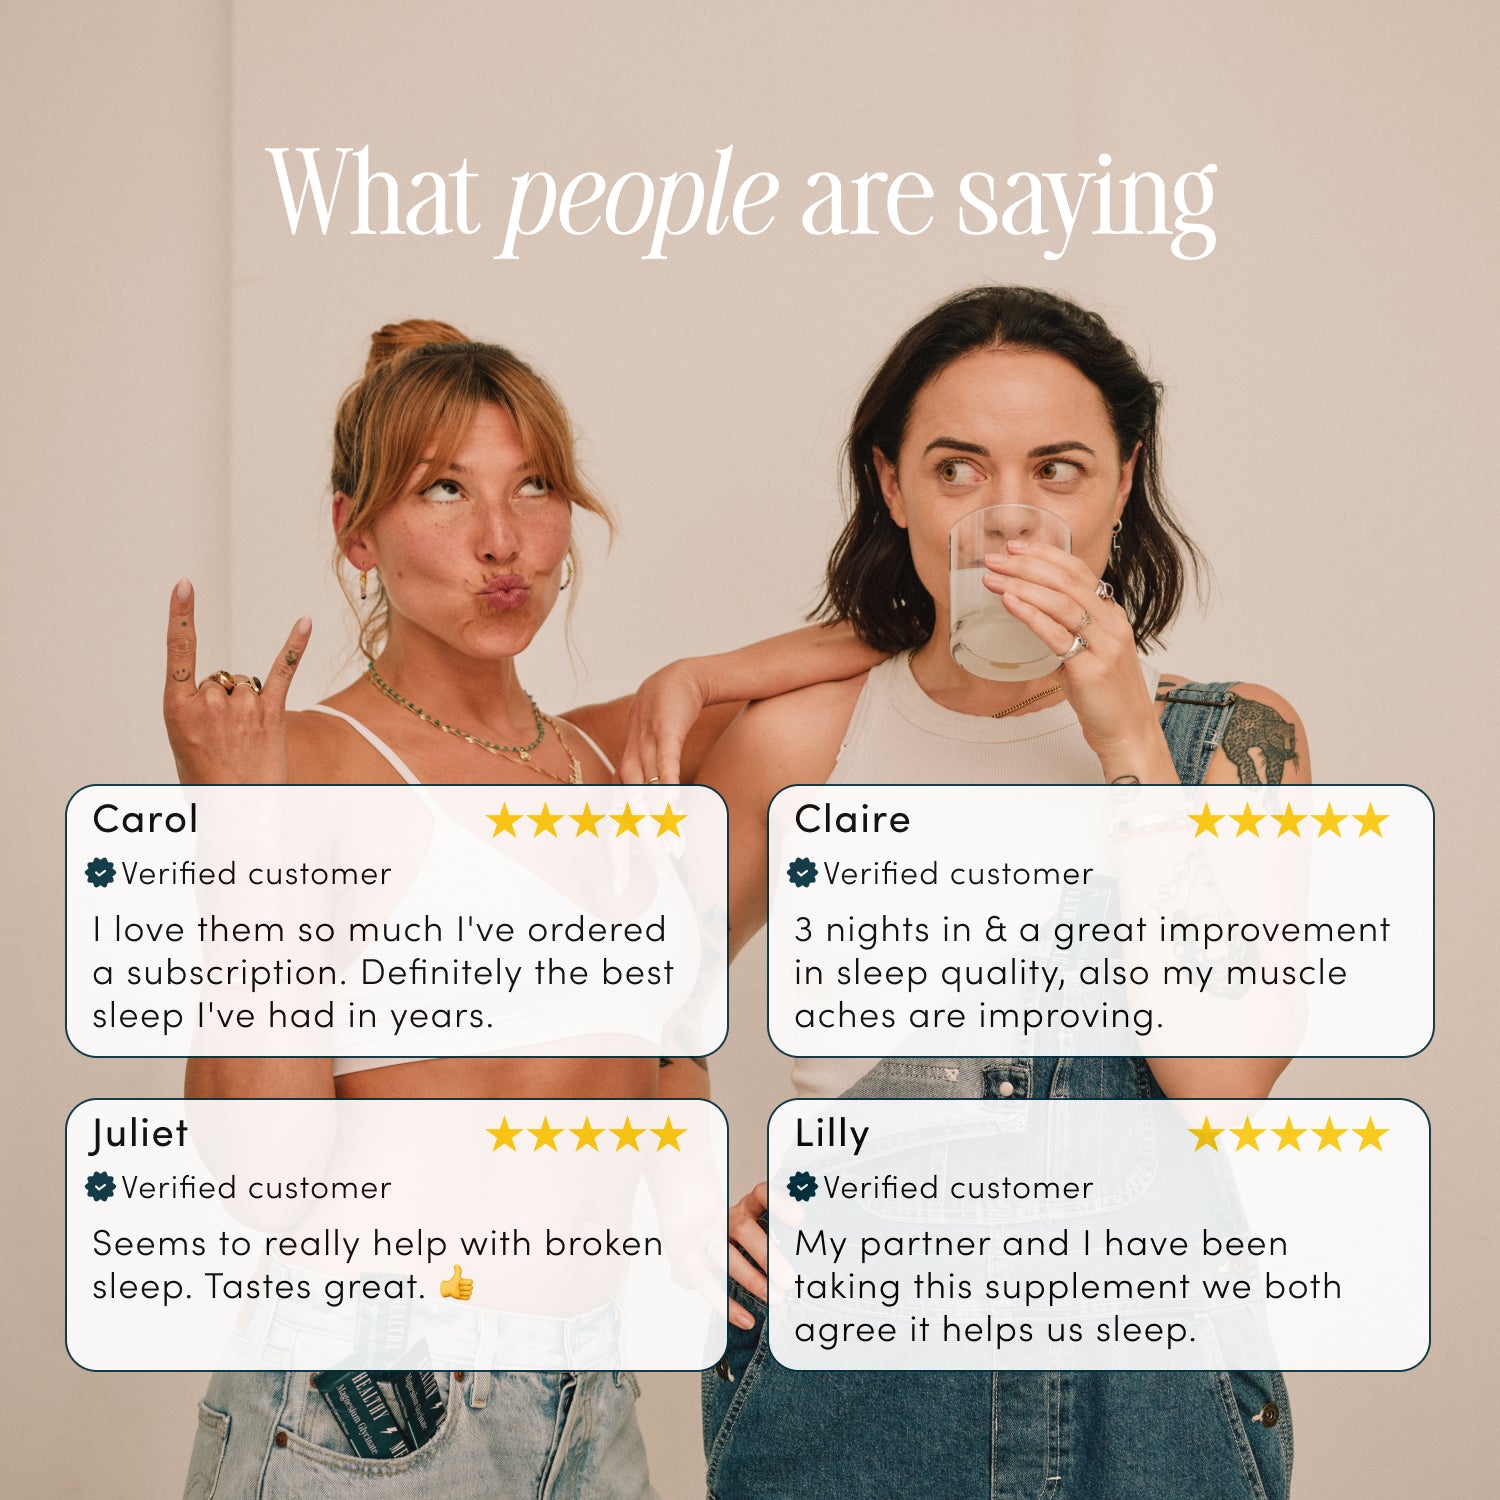 Two women smiling with four customer reviews about a sleep-related product displayed.